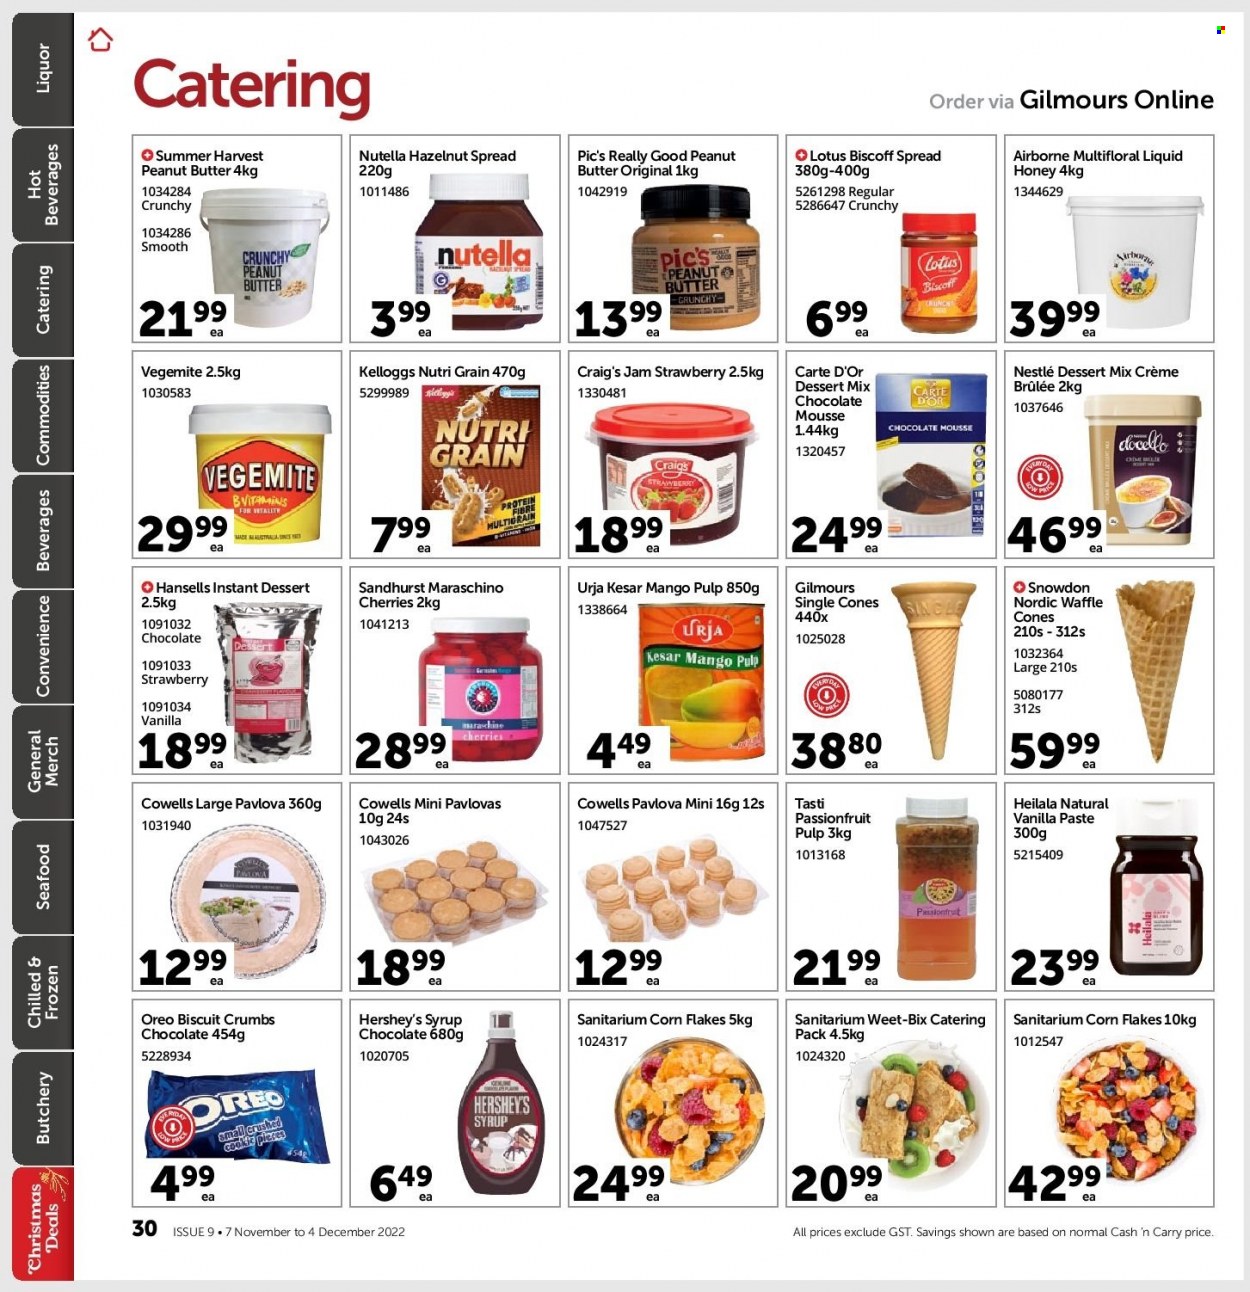 thumbnail - Gilmours mailer - 07.11.2022 - 04.12.2022 - Sales products - mango, seafood, Oreo, Hershey's, Nestlé, Nutella, chocolate, cereal bar, biscuit, Maraschino cherries, corn flakes, Weet-Bix, Nutri-Grain, honey, fruit jam, peanut butter, syrup, hazelnut spread, liquor. Page 29.